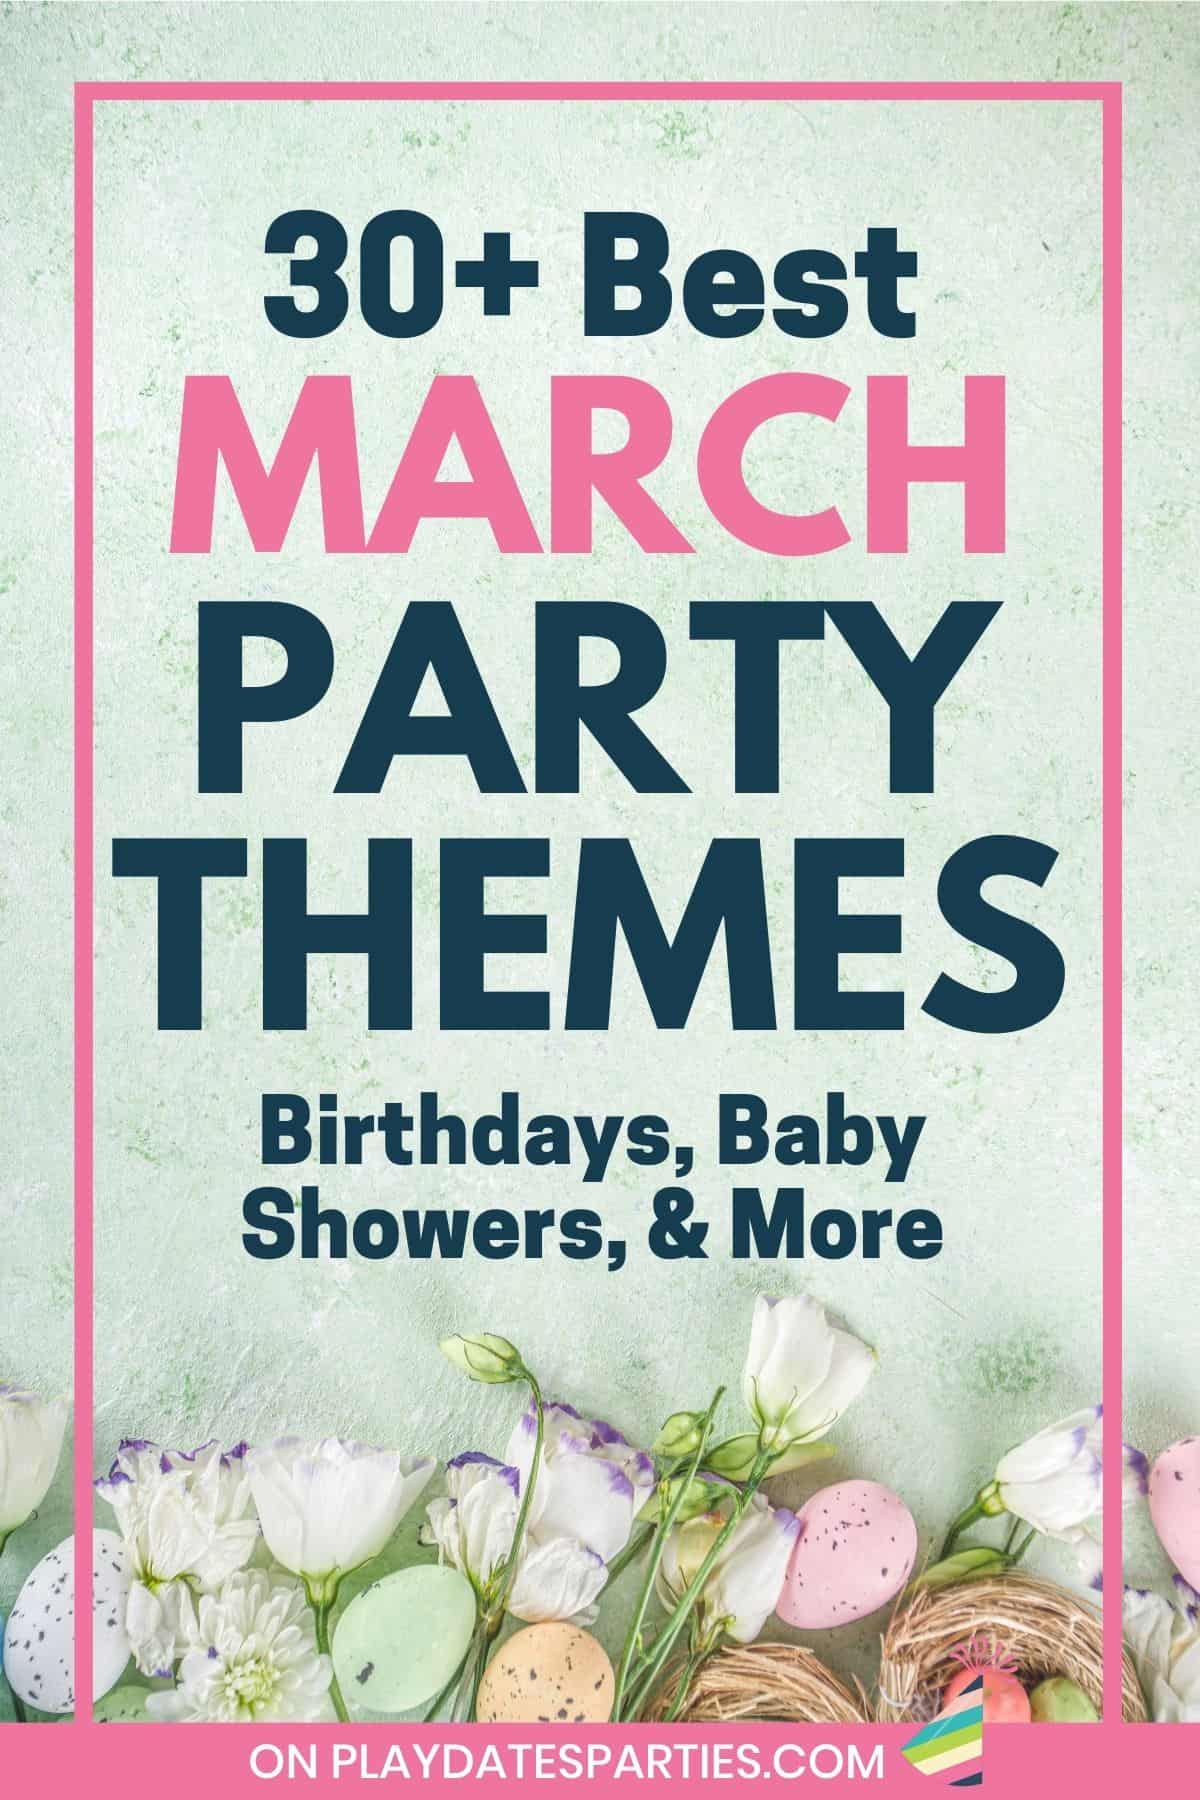 Spring flowers and colorful eggs on a green backdrop with text overlay 30+ best March party themes.